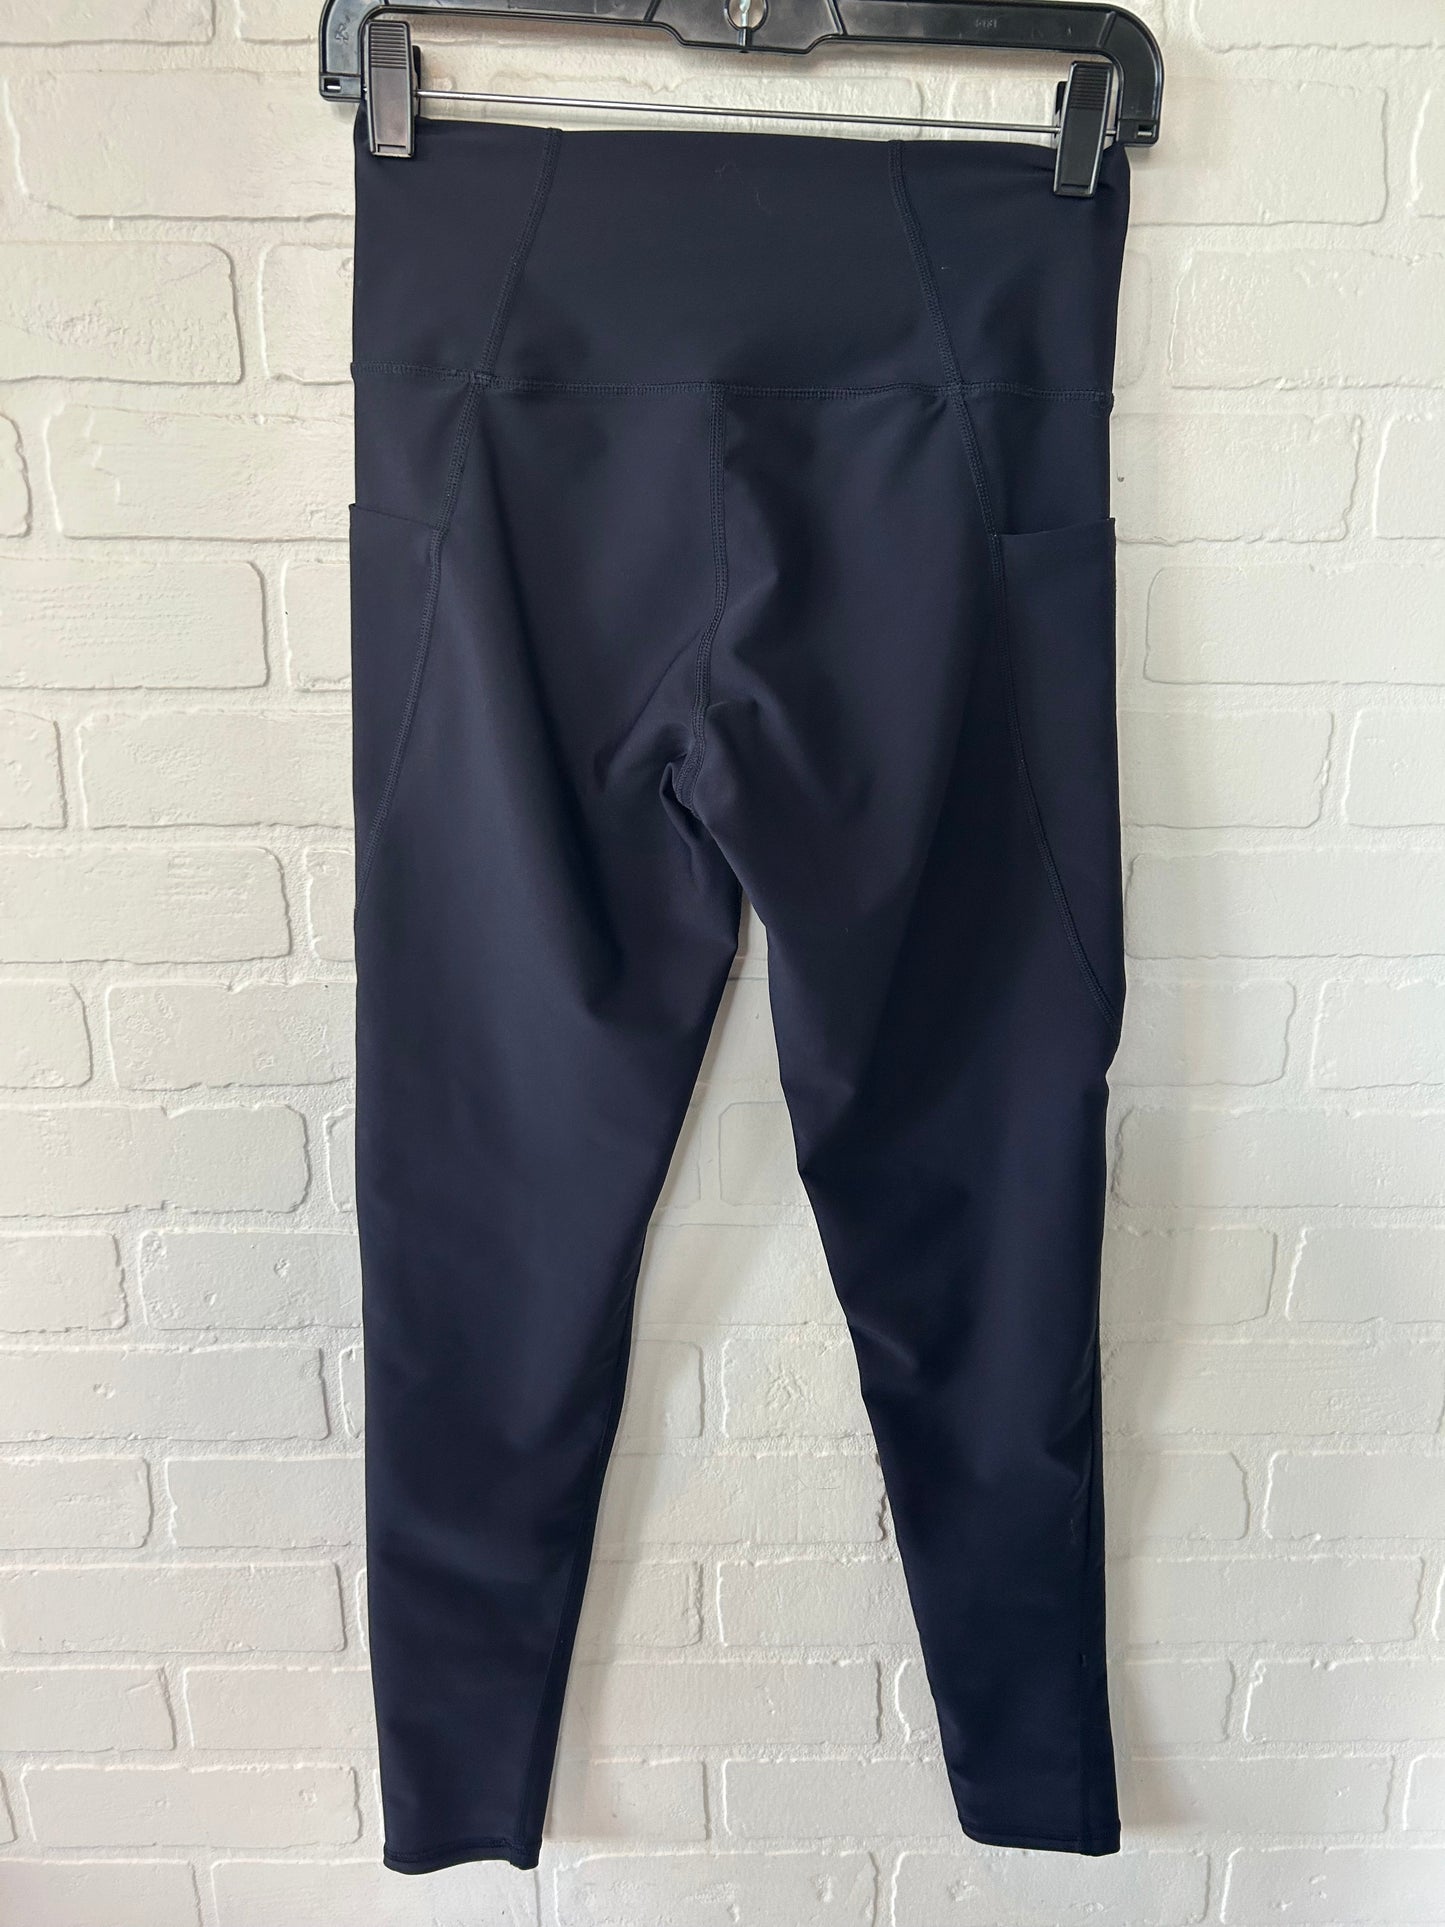 Athletic Leggings By Cmc  Size: 8